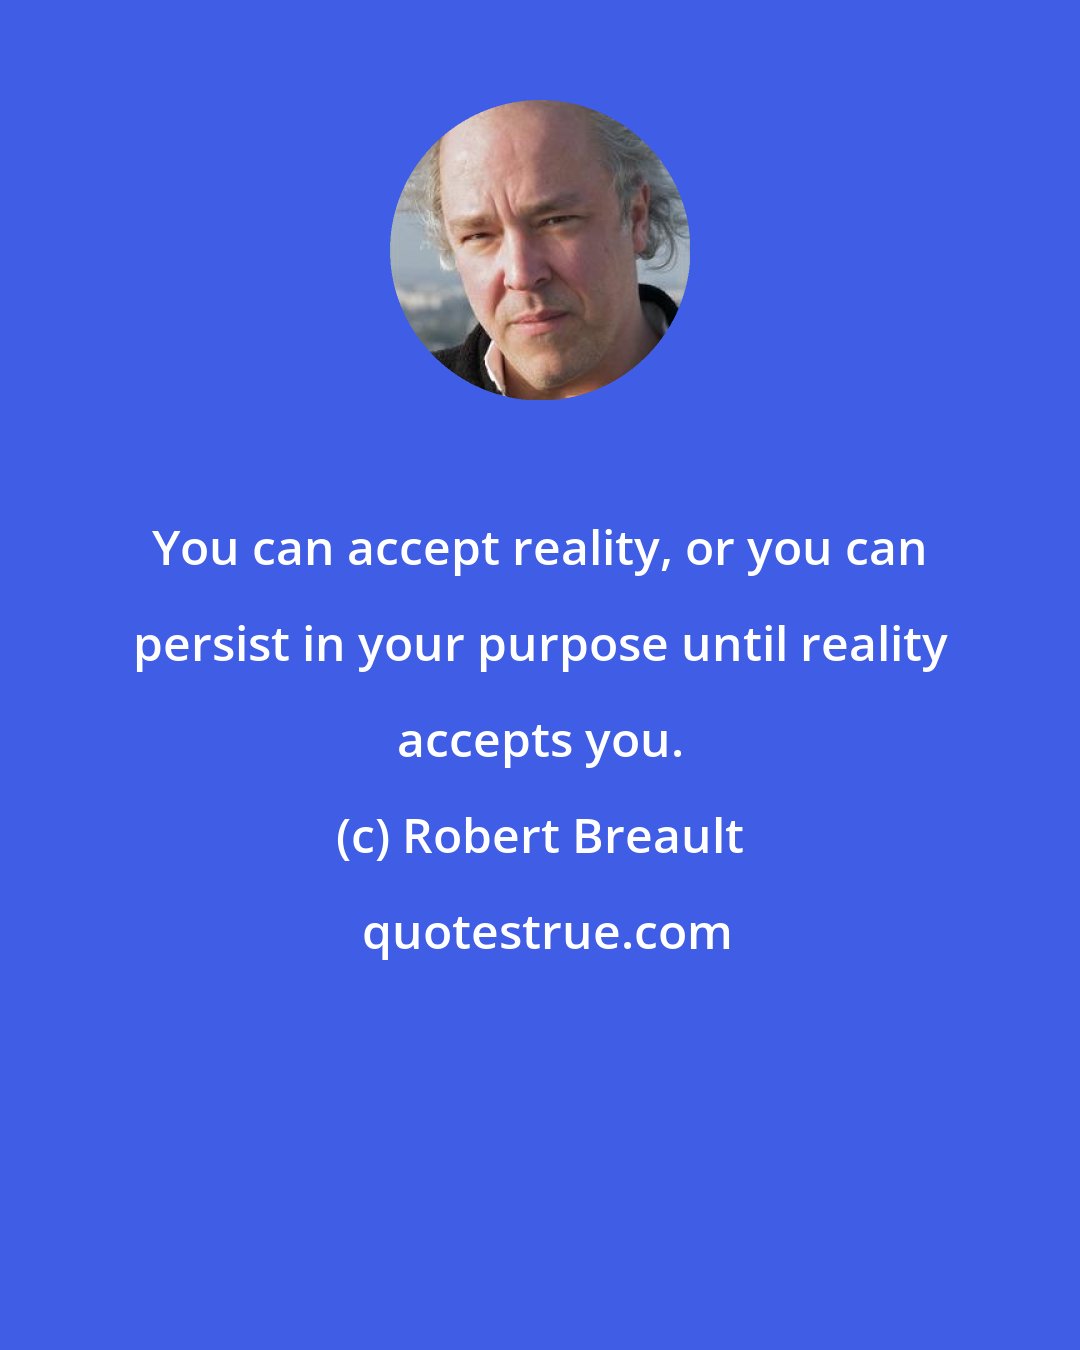 Robert Breault: You can accept reality, or you can persist in your purpose until reality accepts you.